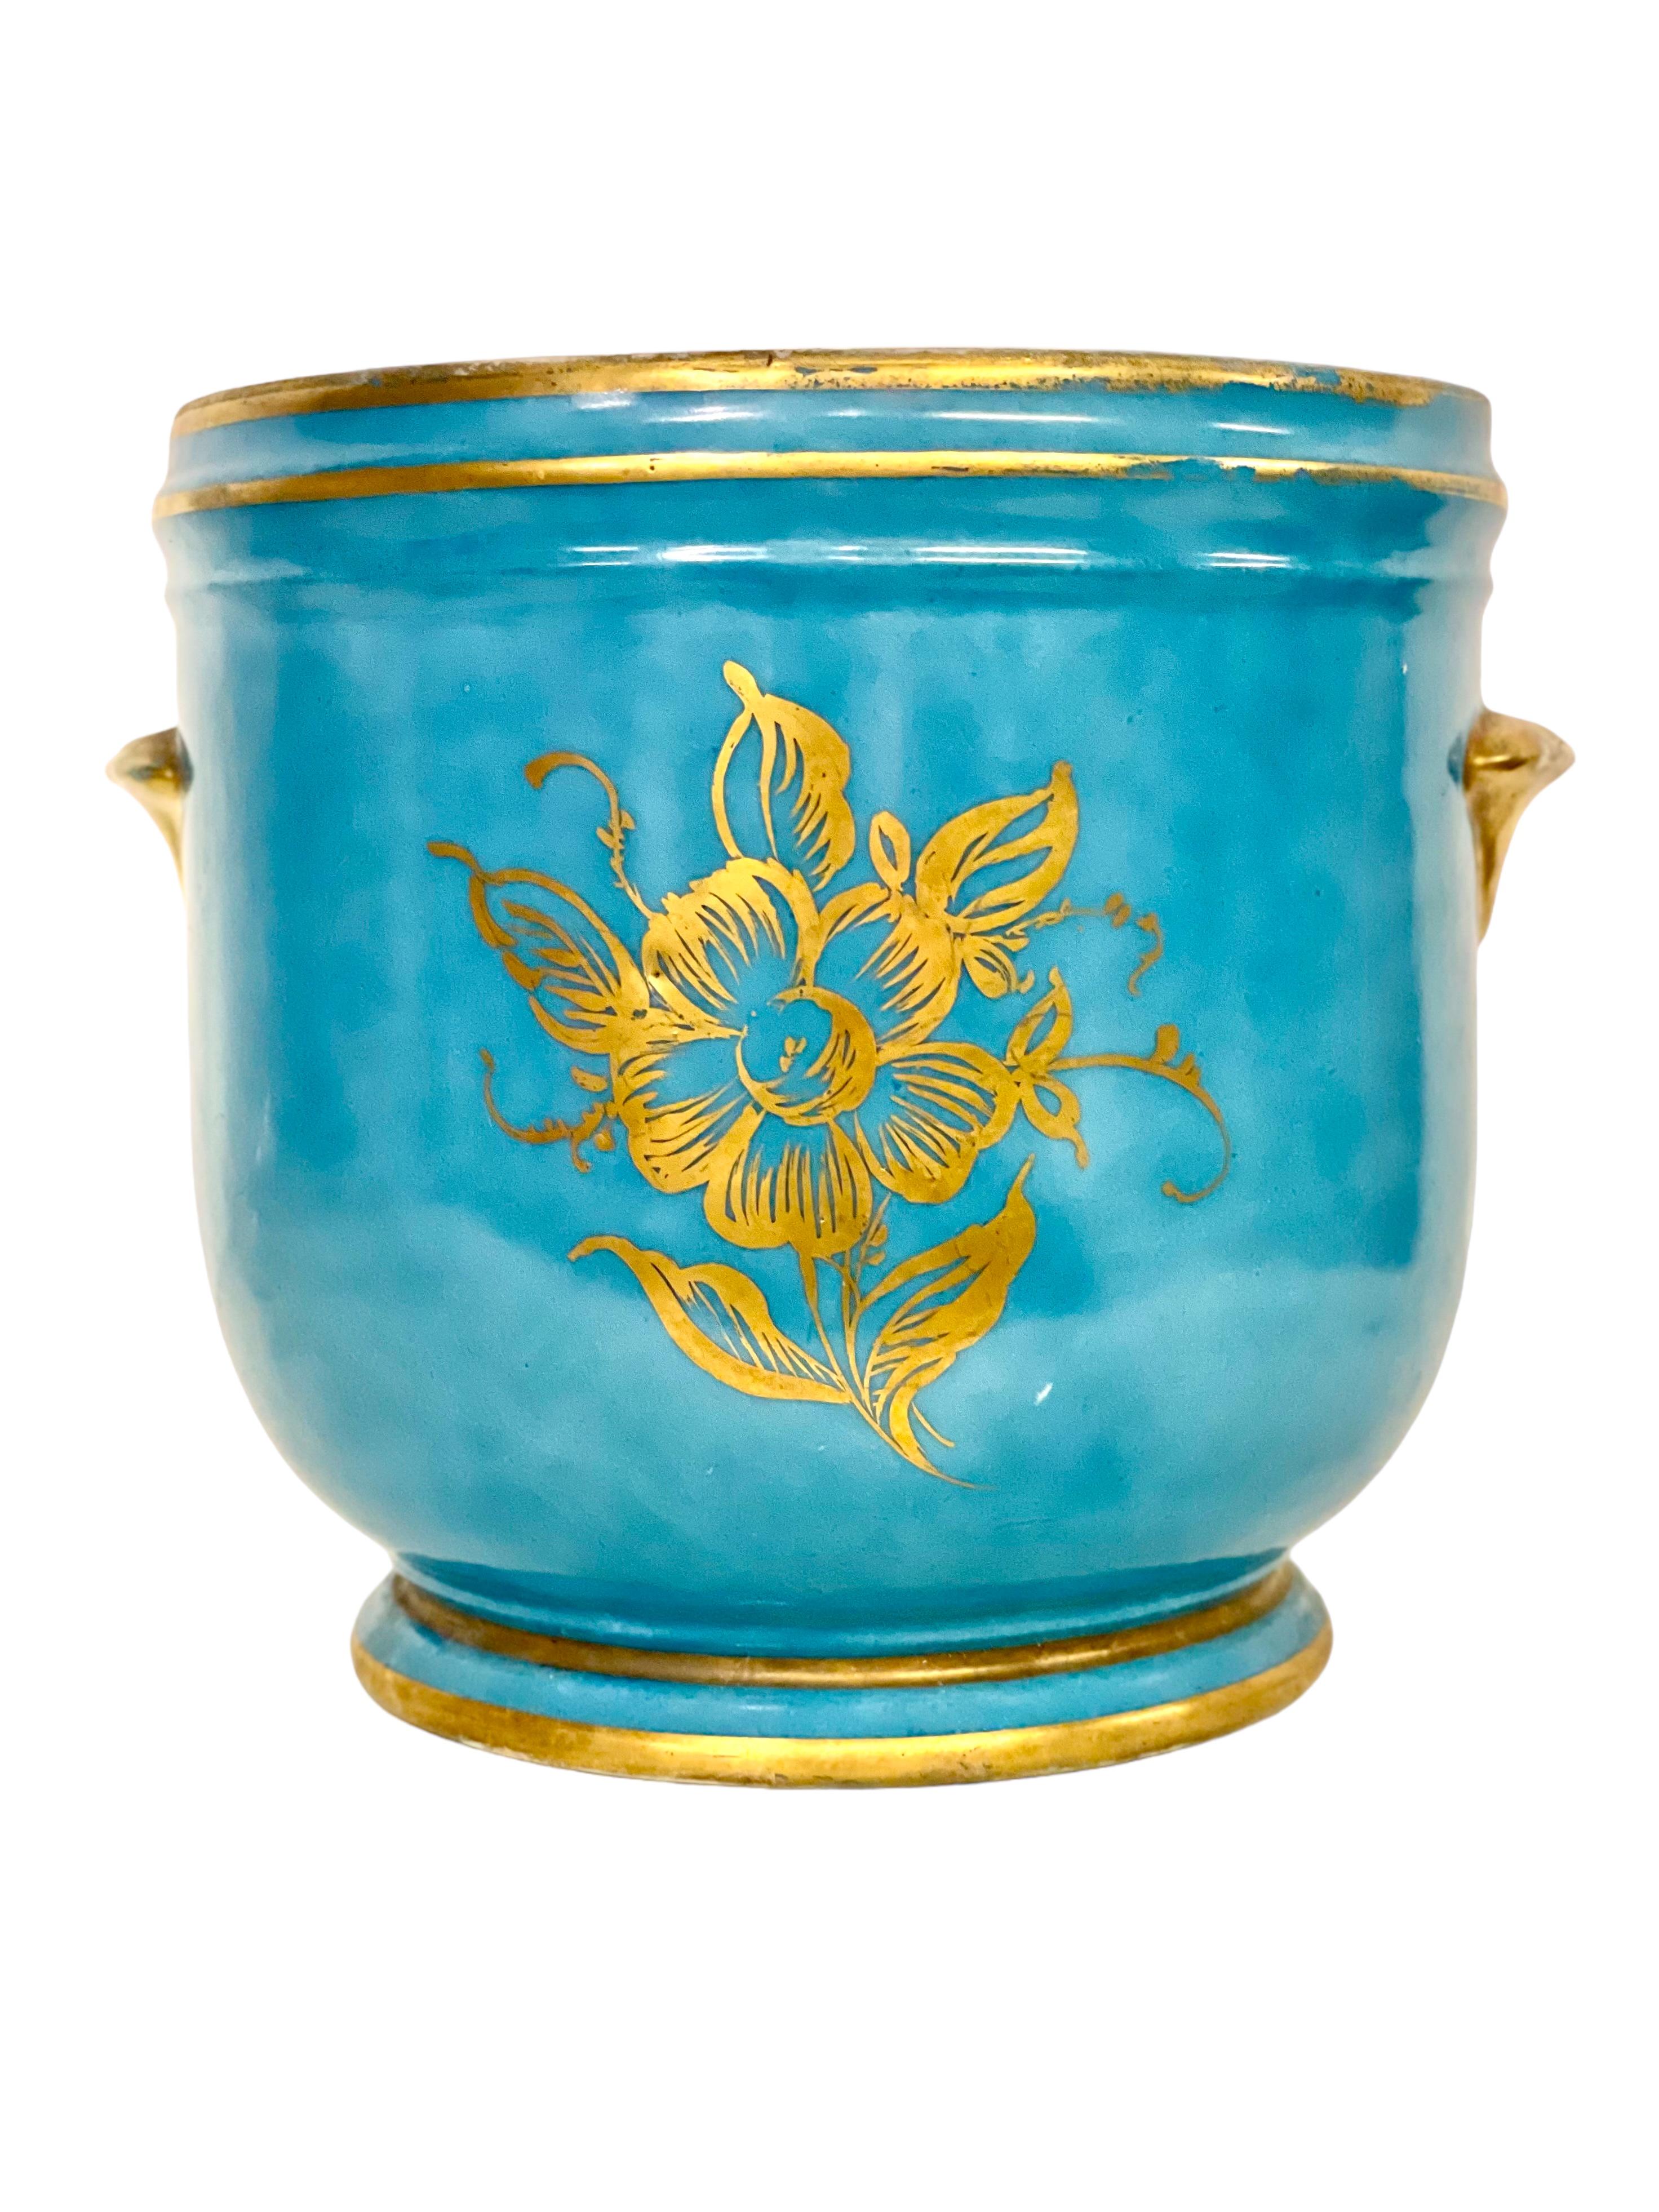 A beautiful and vividly coloured 19th century cache pot, or jardinière, lovingly crafted from Limoges porcelain in the 18th century Sèvres style. This charming planter features two side handles, and is glazed in classic powder blue, highlighted